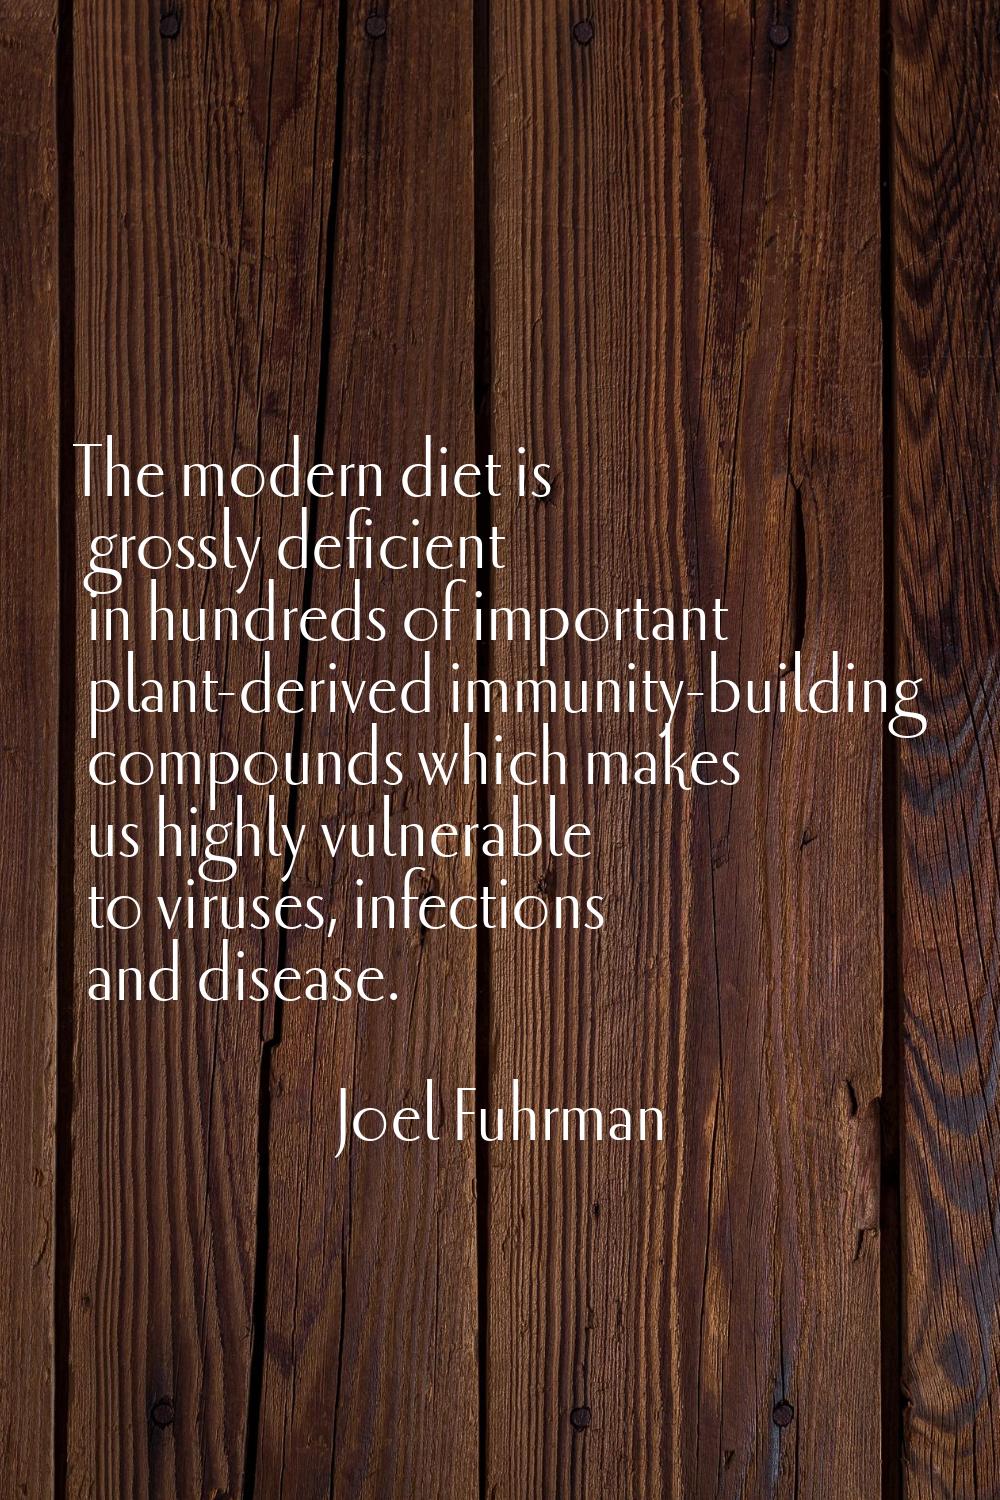 The modern diet is grossly deficient in hundreds of important plant-derived immunity-building compo